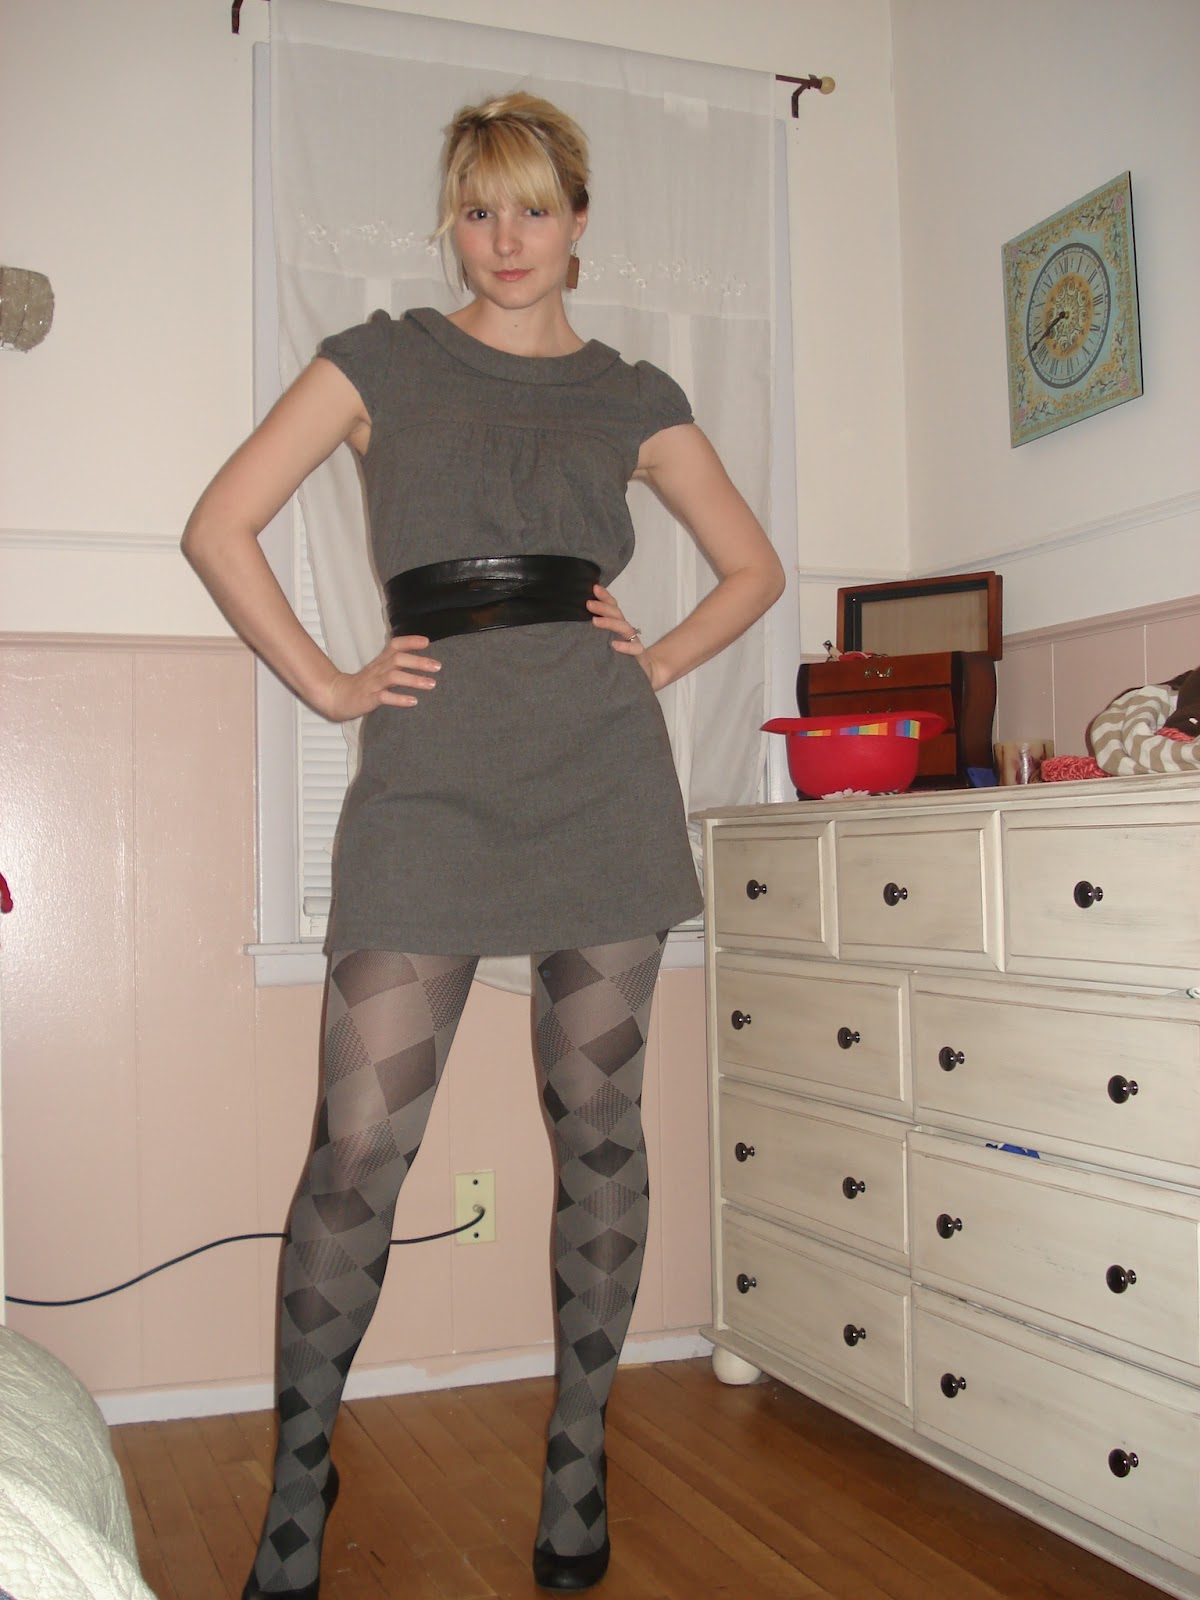 VERY LONG AMATEUR LEGS IN PATTERNED tights pantyhose and dress.